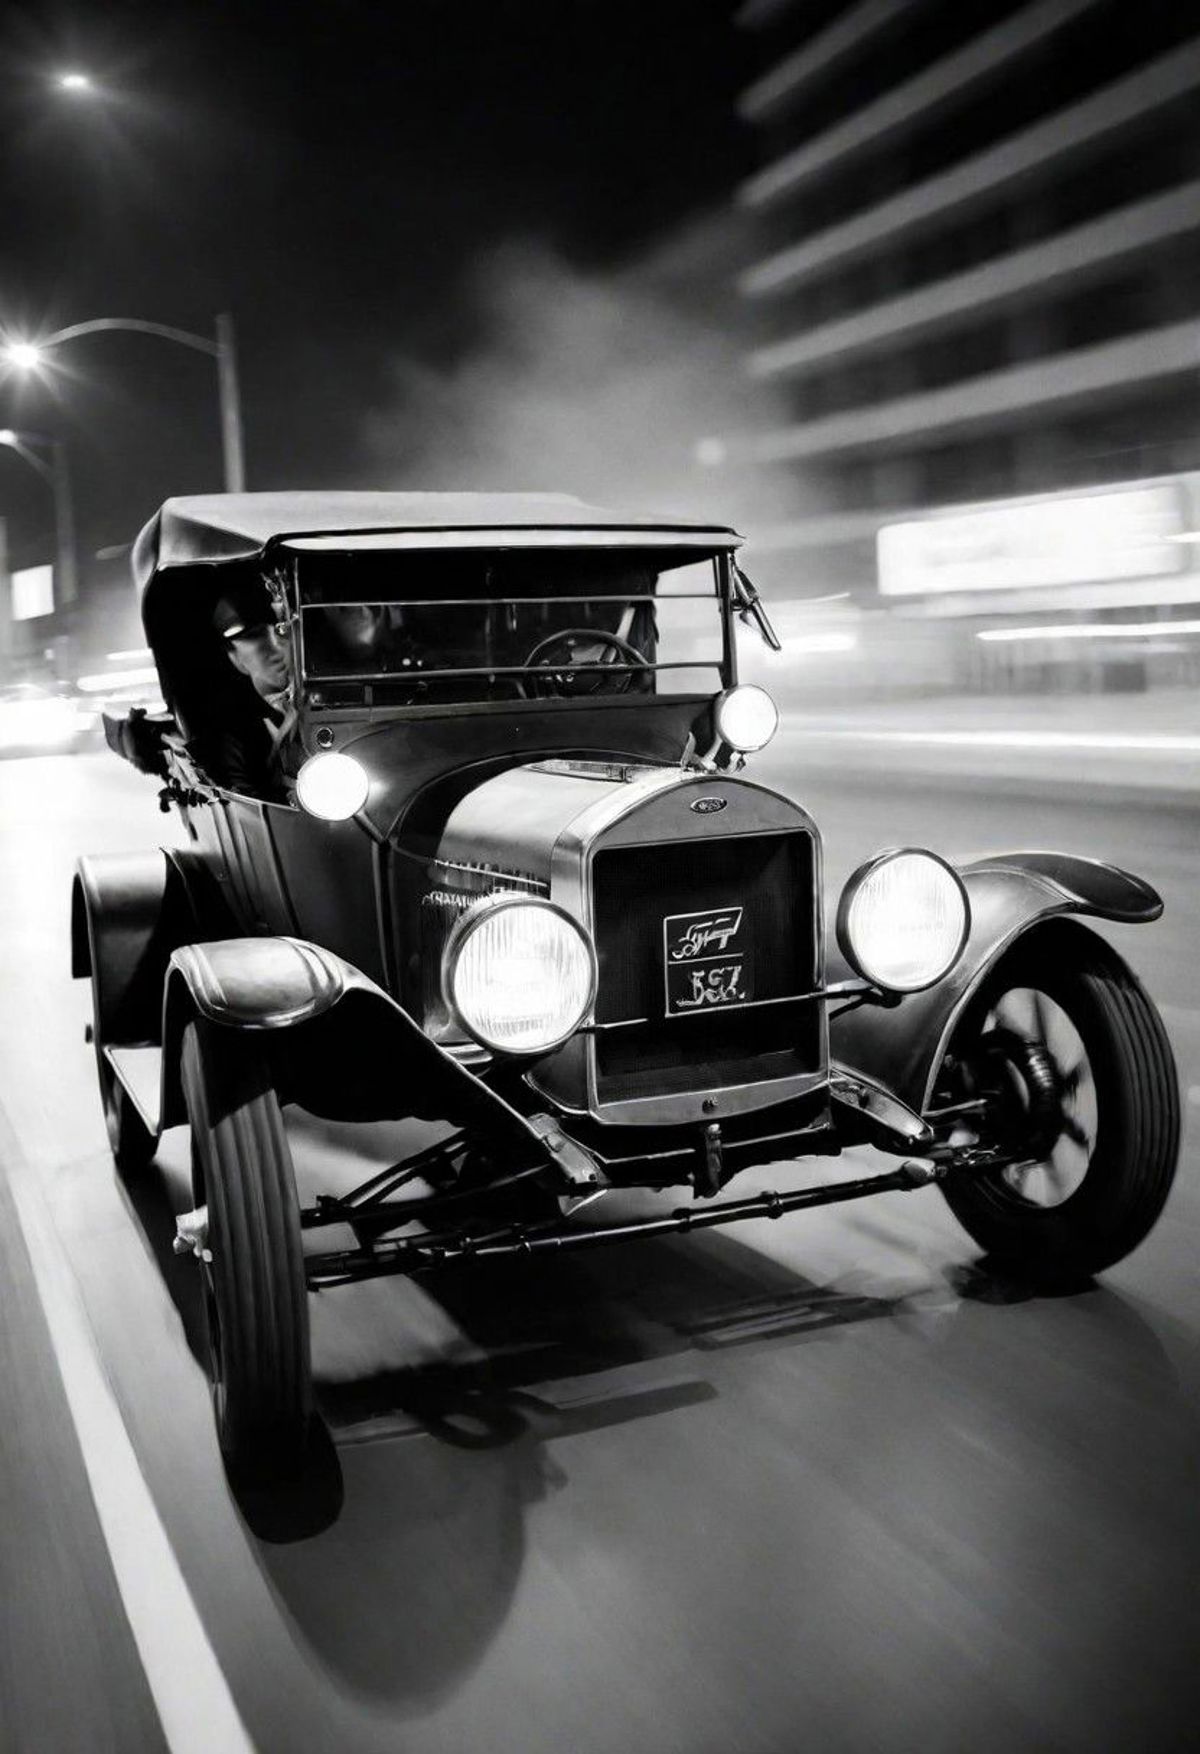 A vintage car with a man driving down a city street at night.